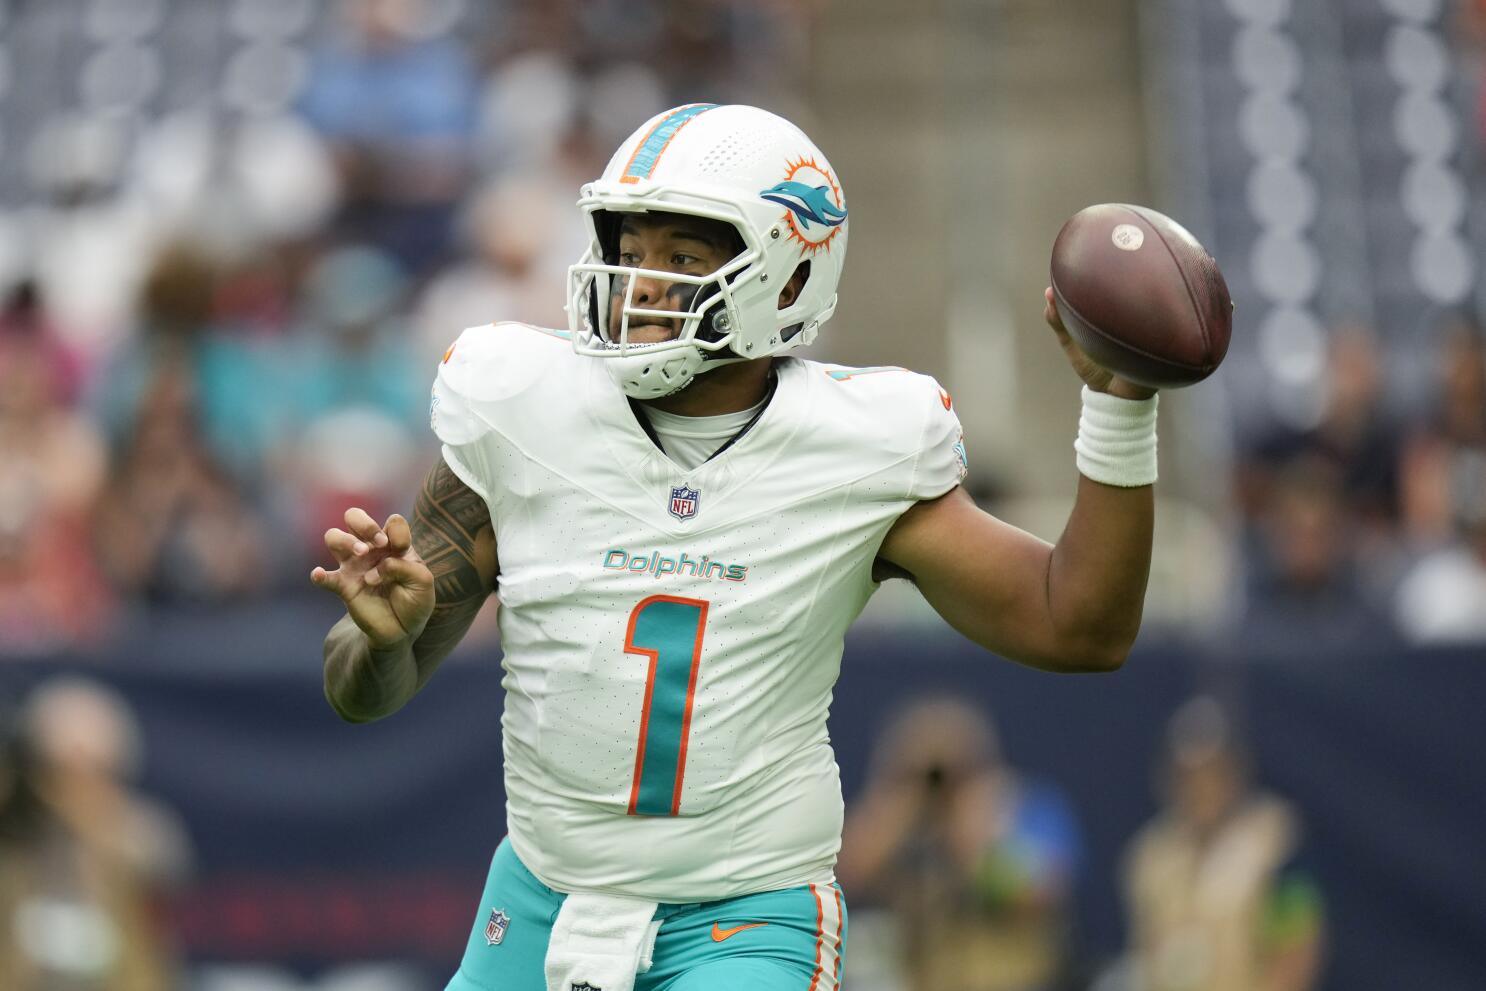 Tagovailoa leads TD drive in preseason debut to help Dolphins over